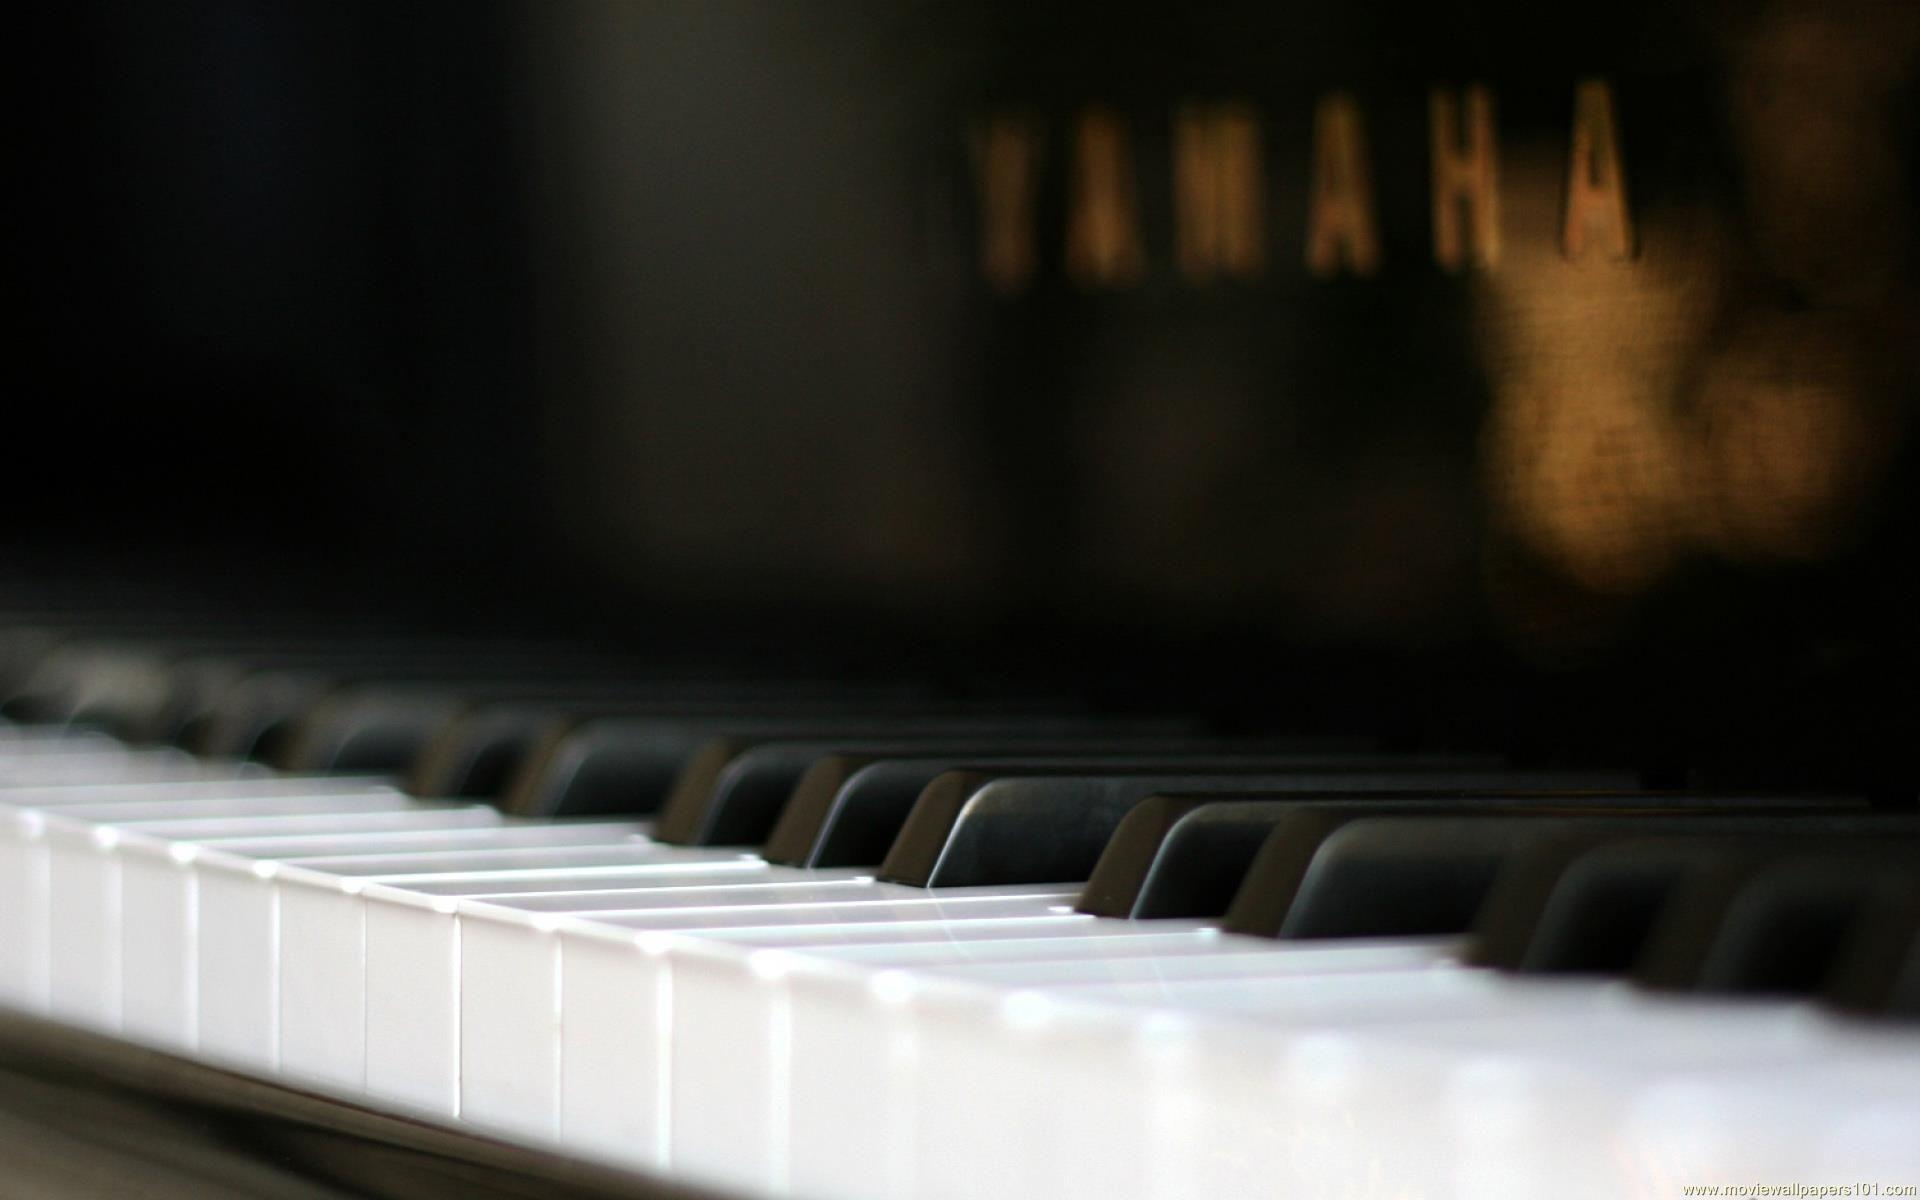 Grand Piano: Yamaha, A large musical instrument that played by pressing black and white keys on a keyboard. 1920x1200 HD Background.